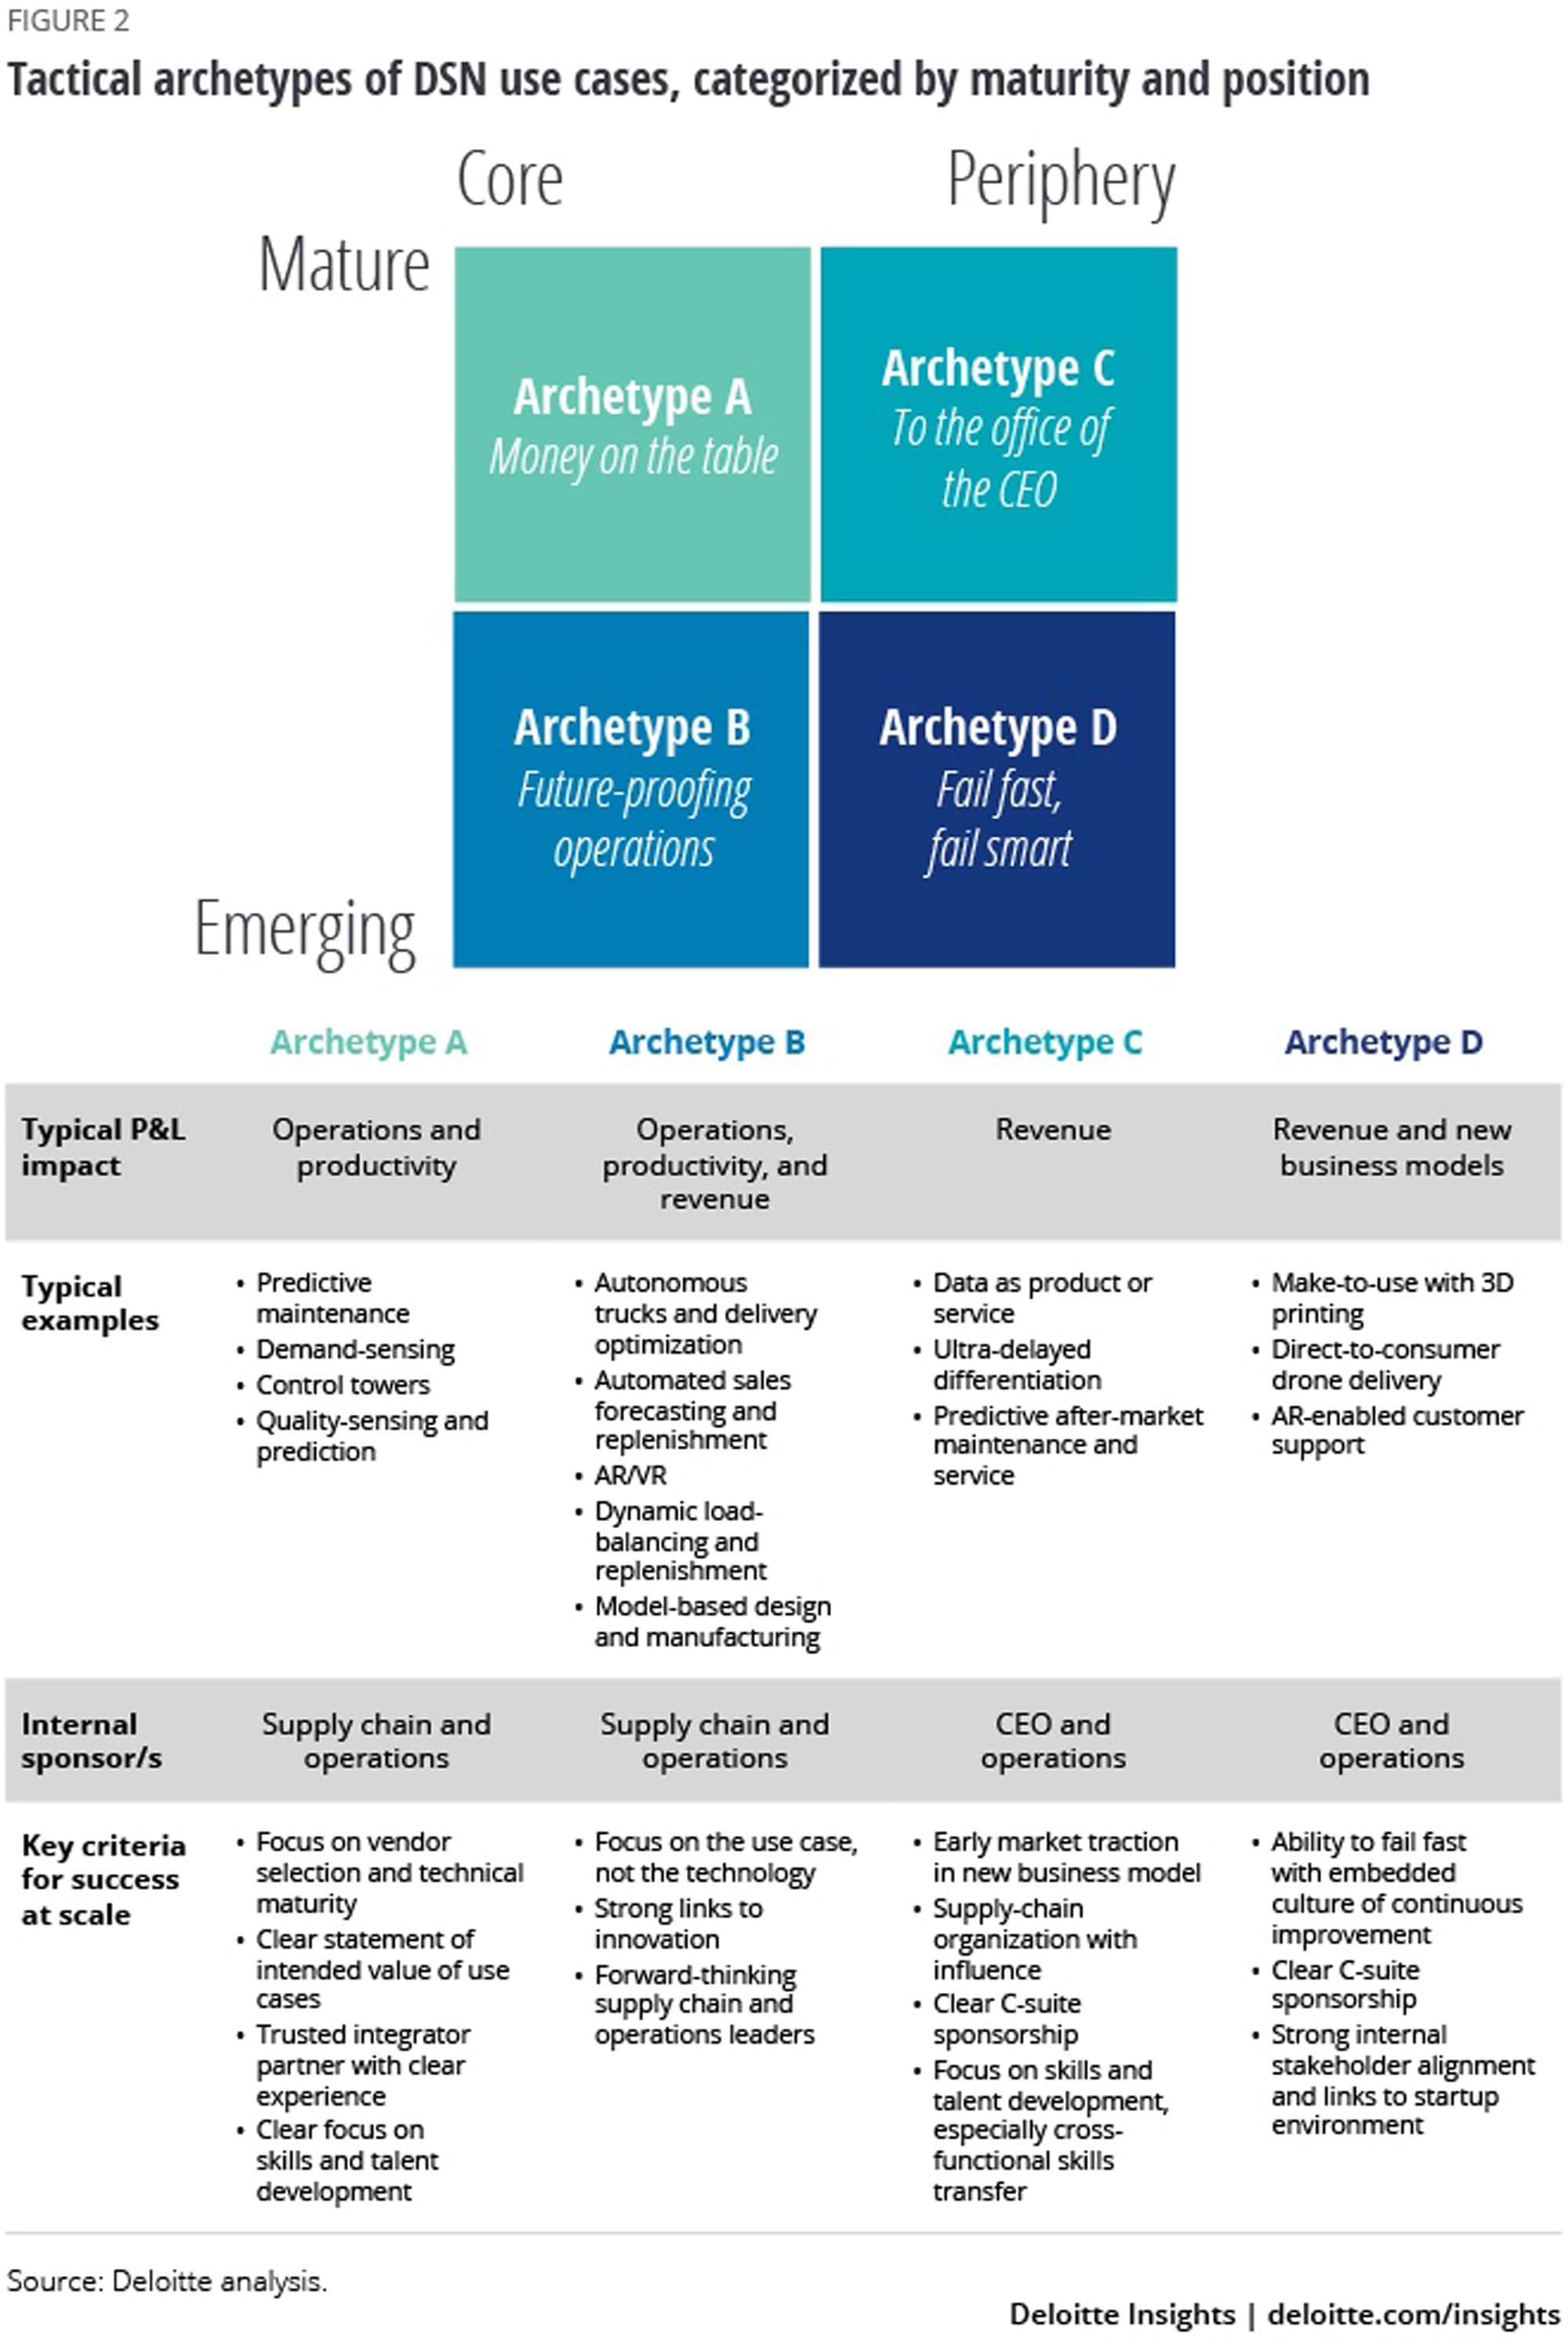 Tactical archetypes of DSN use cases, categorized by maturity and position